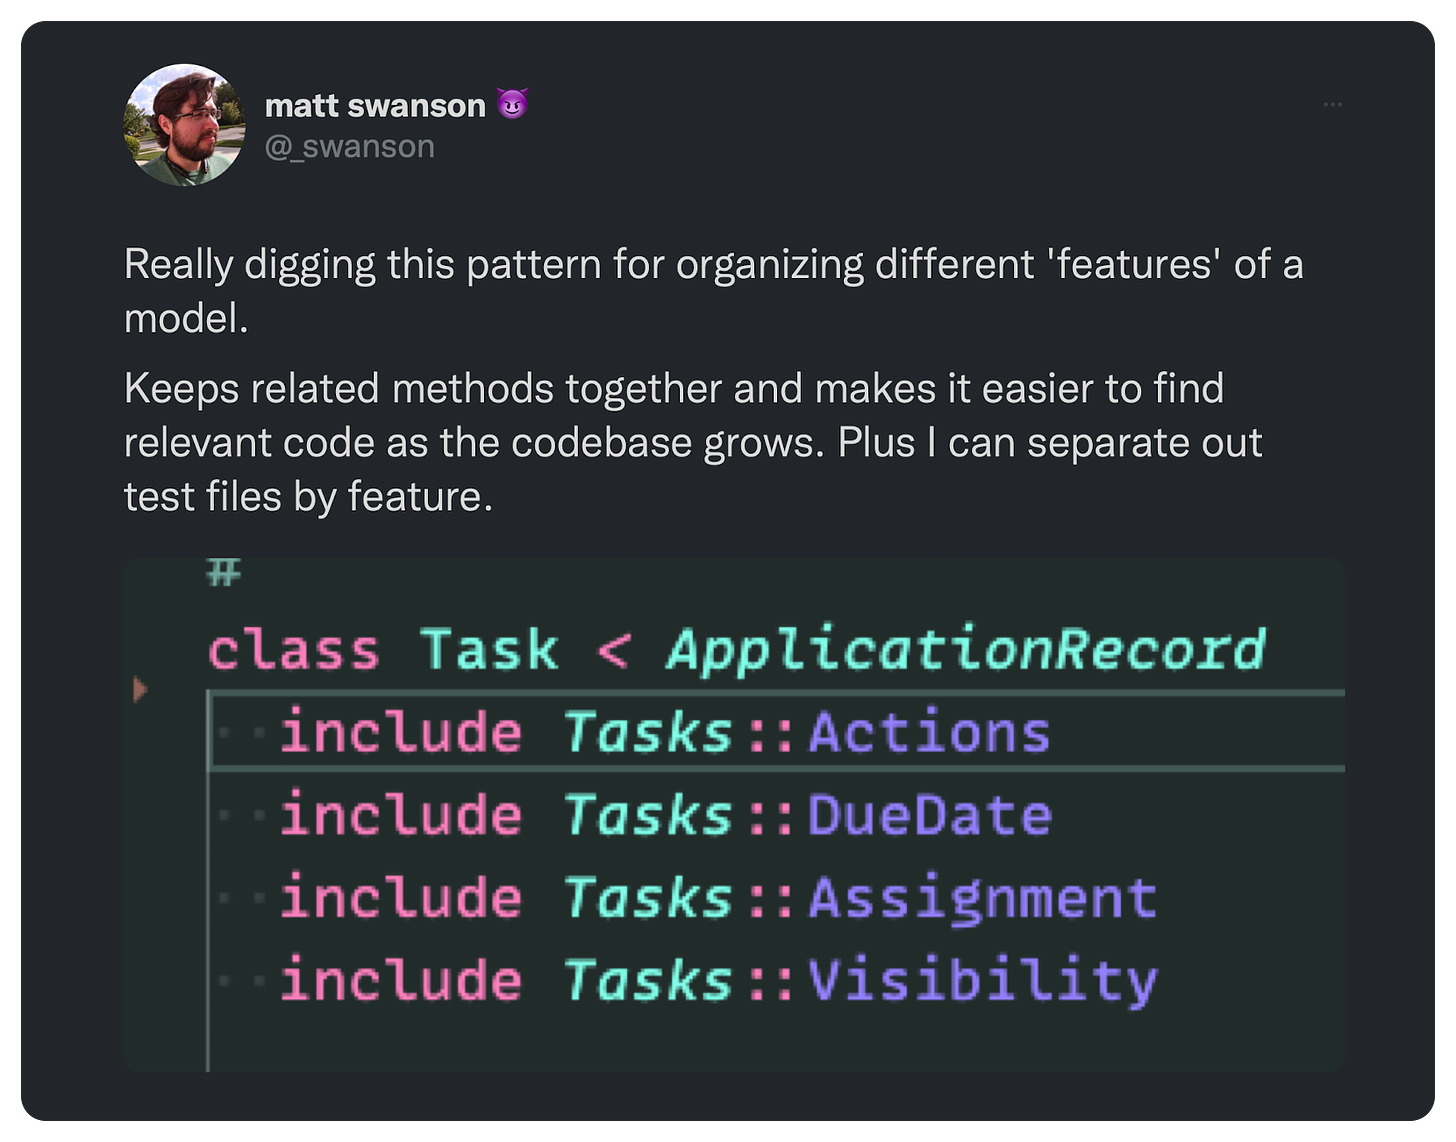 Really digging this pattern for organizing different 'features' of a model. Keeps related methods together and makes it easier to find relevant code as the codebase grows. Plus I can separate out test files by feature.